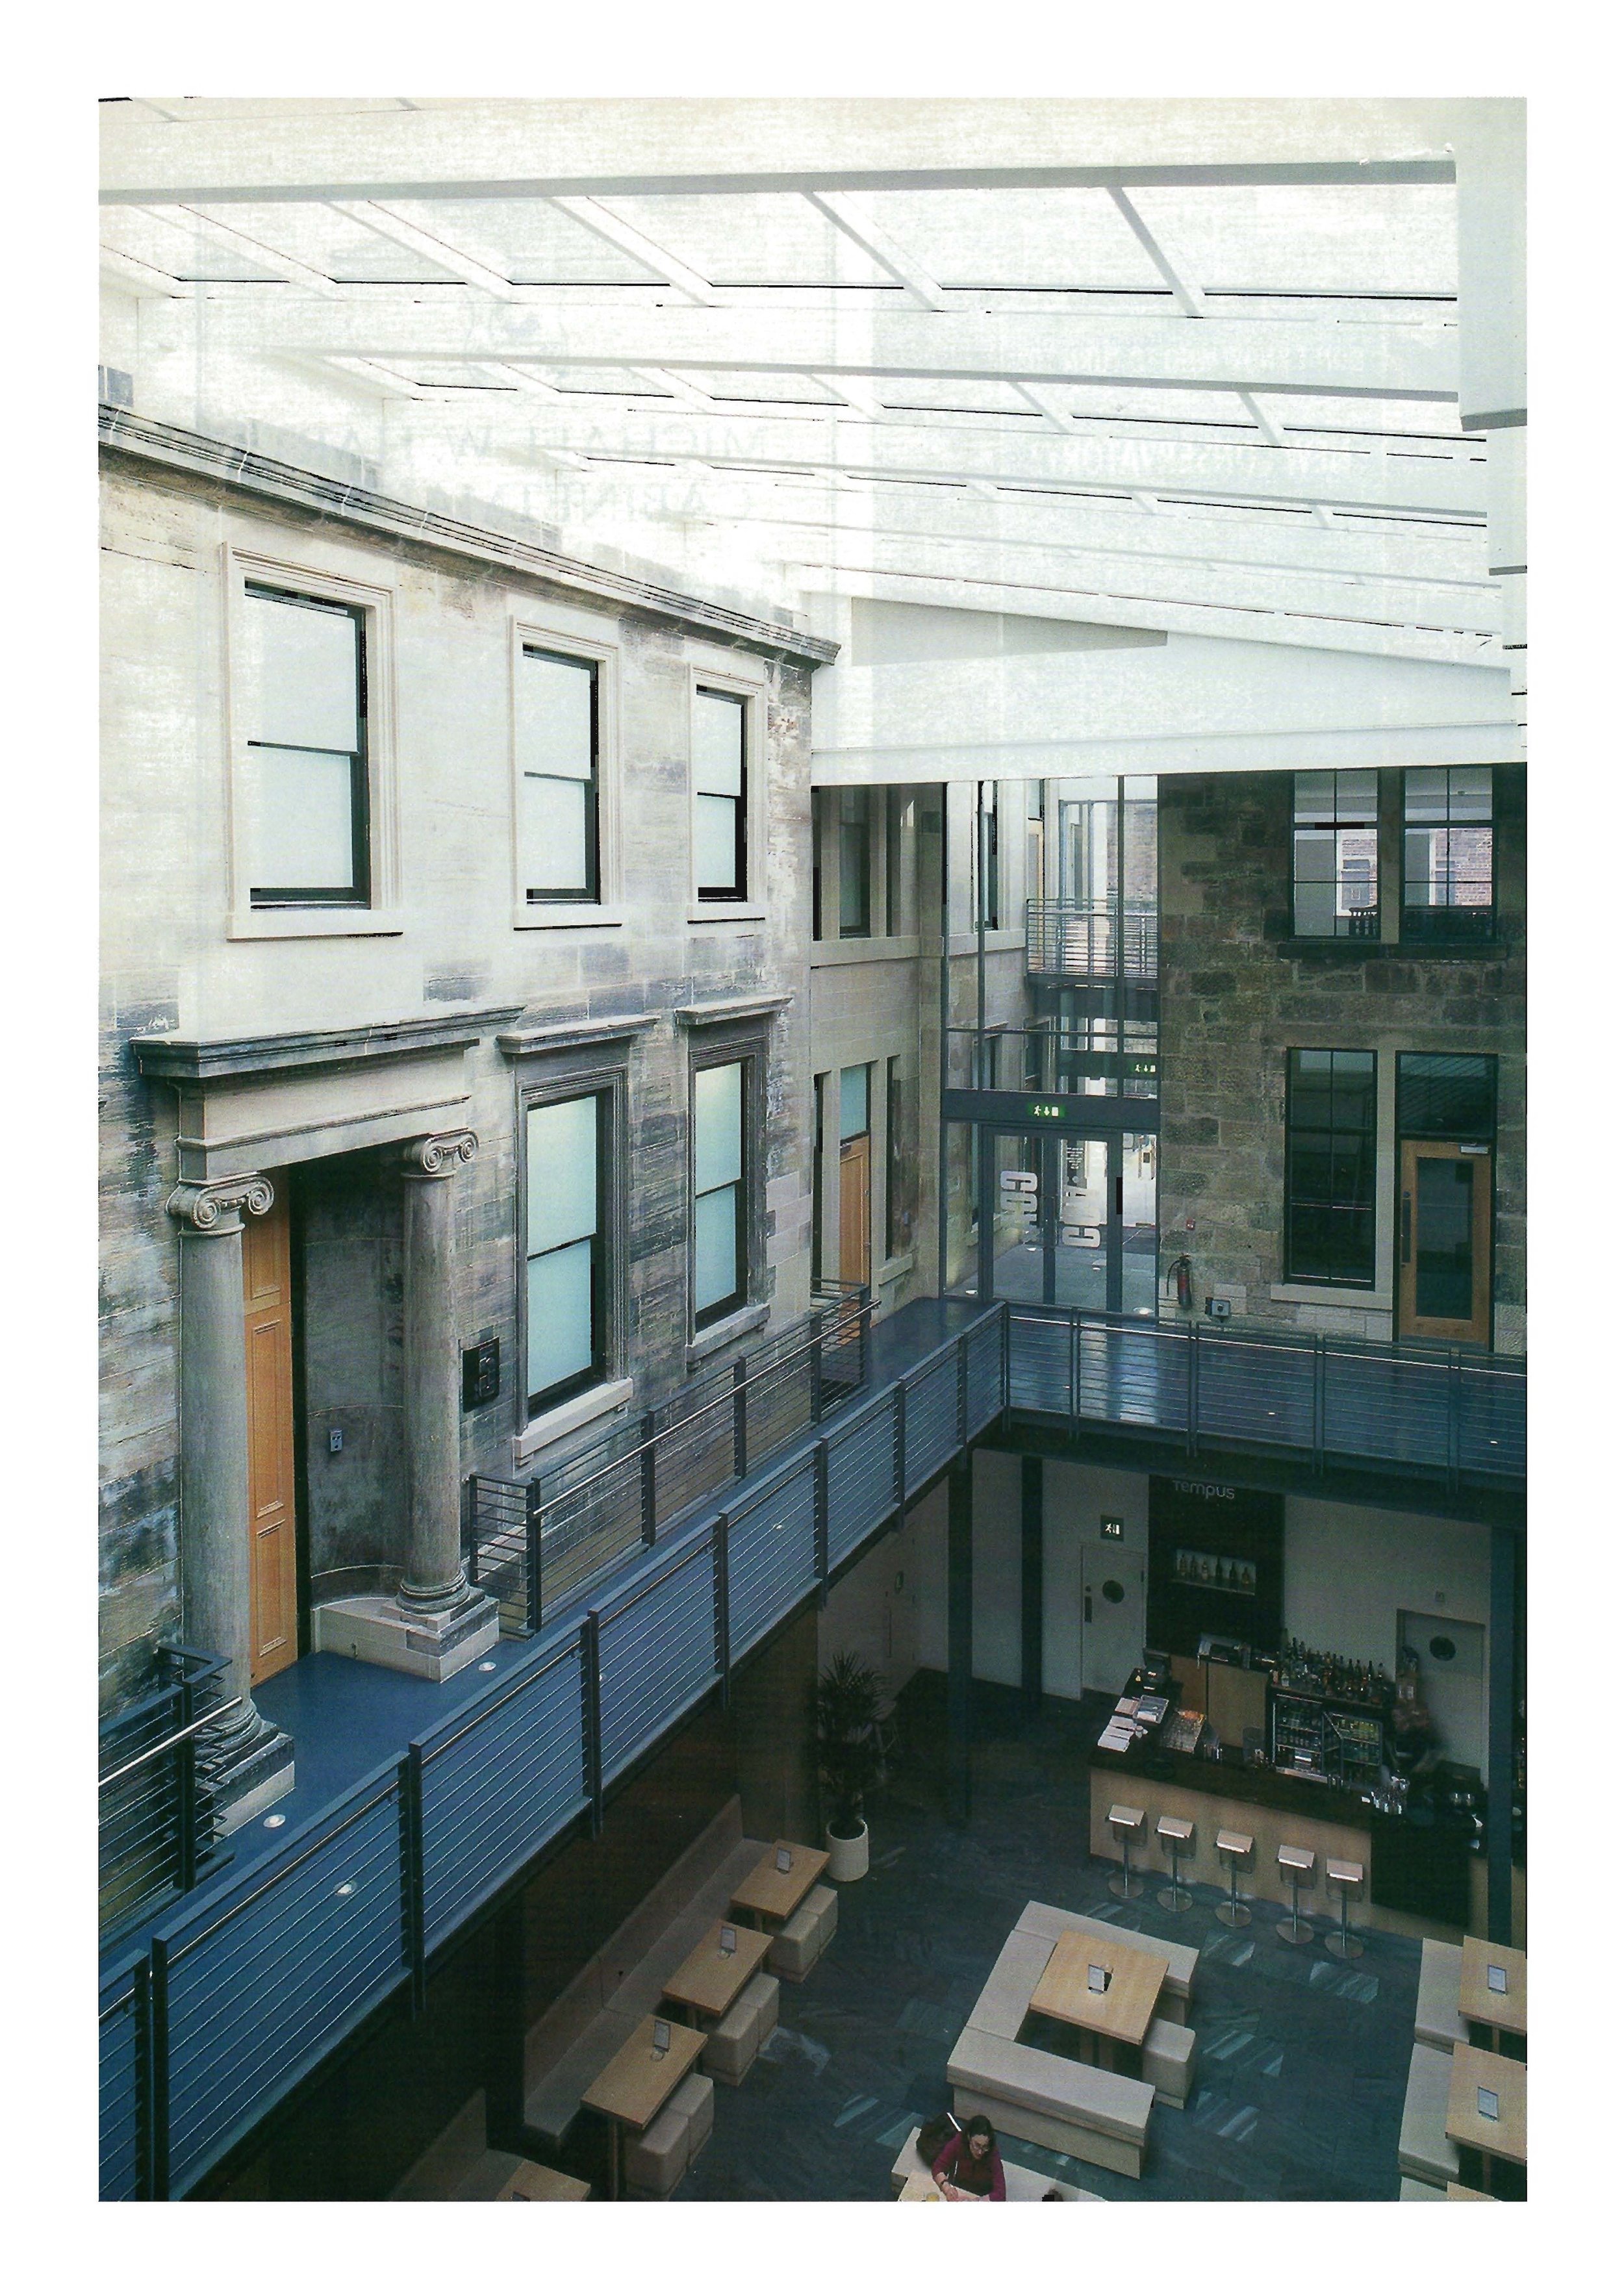 Intoxicating happenings: The Glasgow Centre for Contemporary Arts